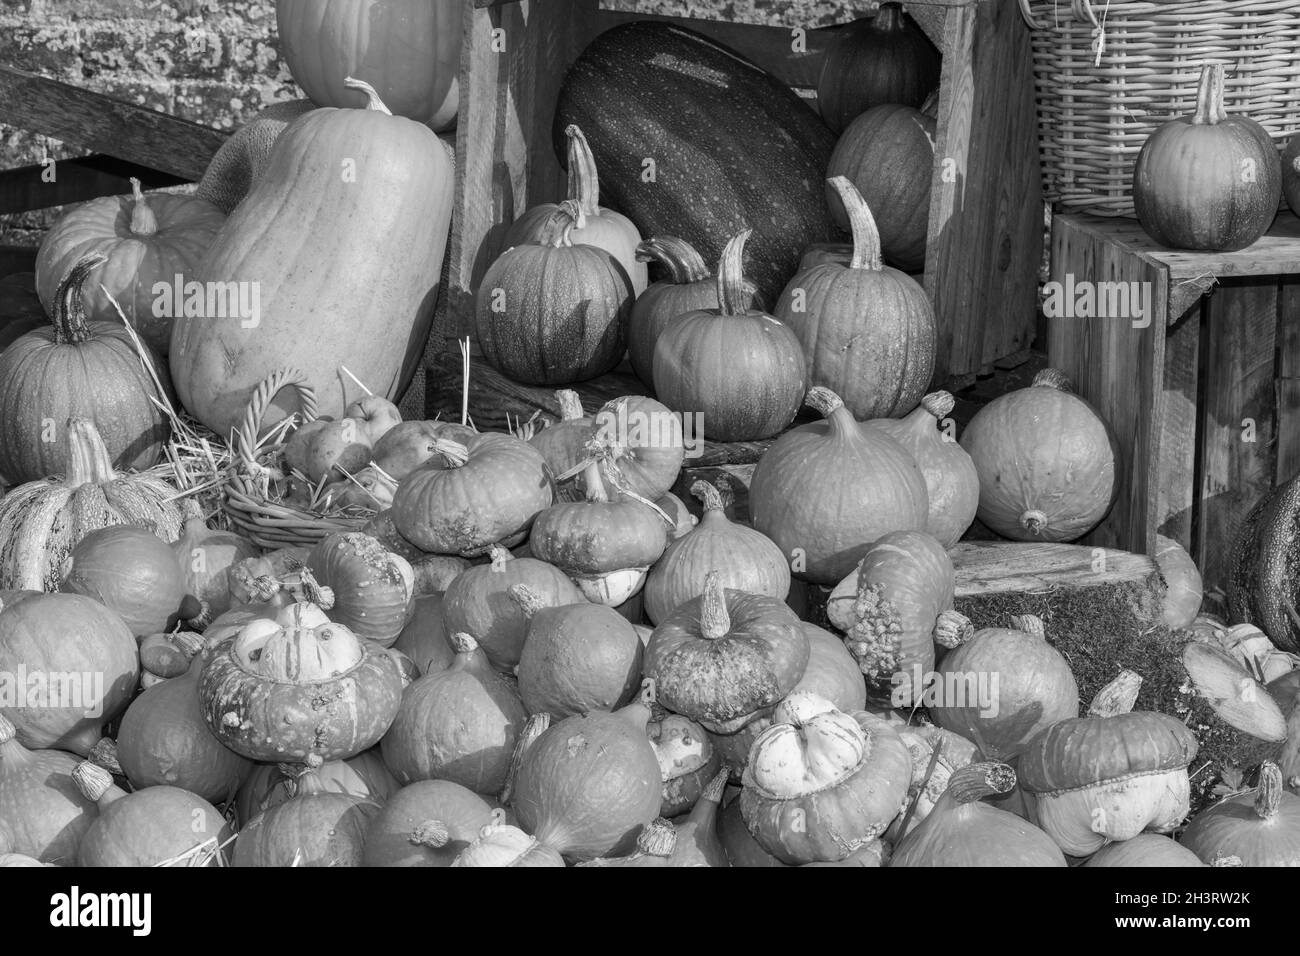 A pile of pumpkins on the ground Stock Photo